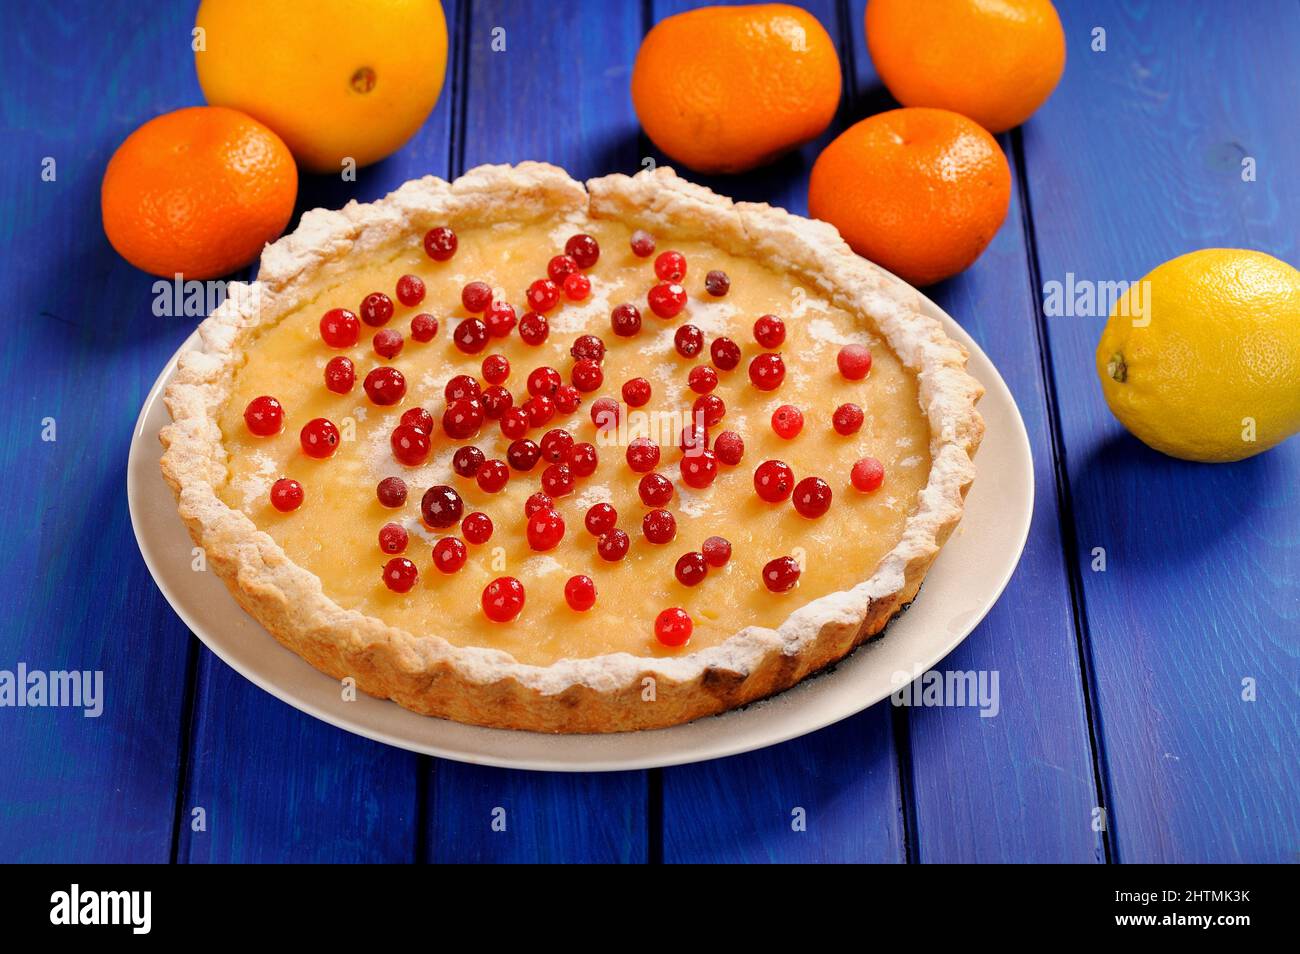 Tasty lemon pie decorated with fresh cranberries and whole orange, lemon and clementines on deep blue table  horizontal Stock Photo